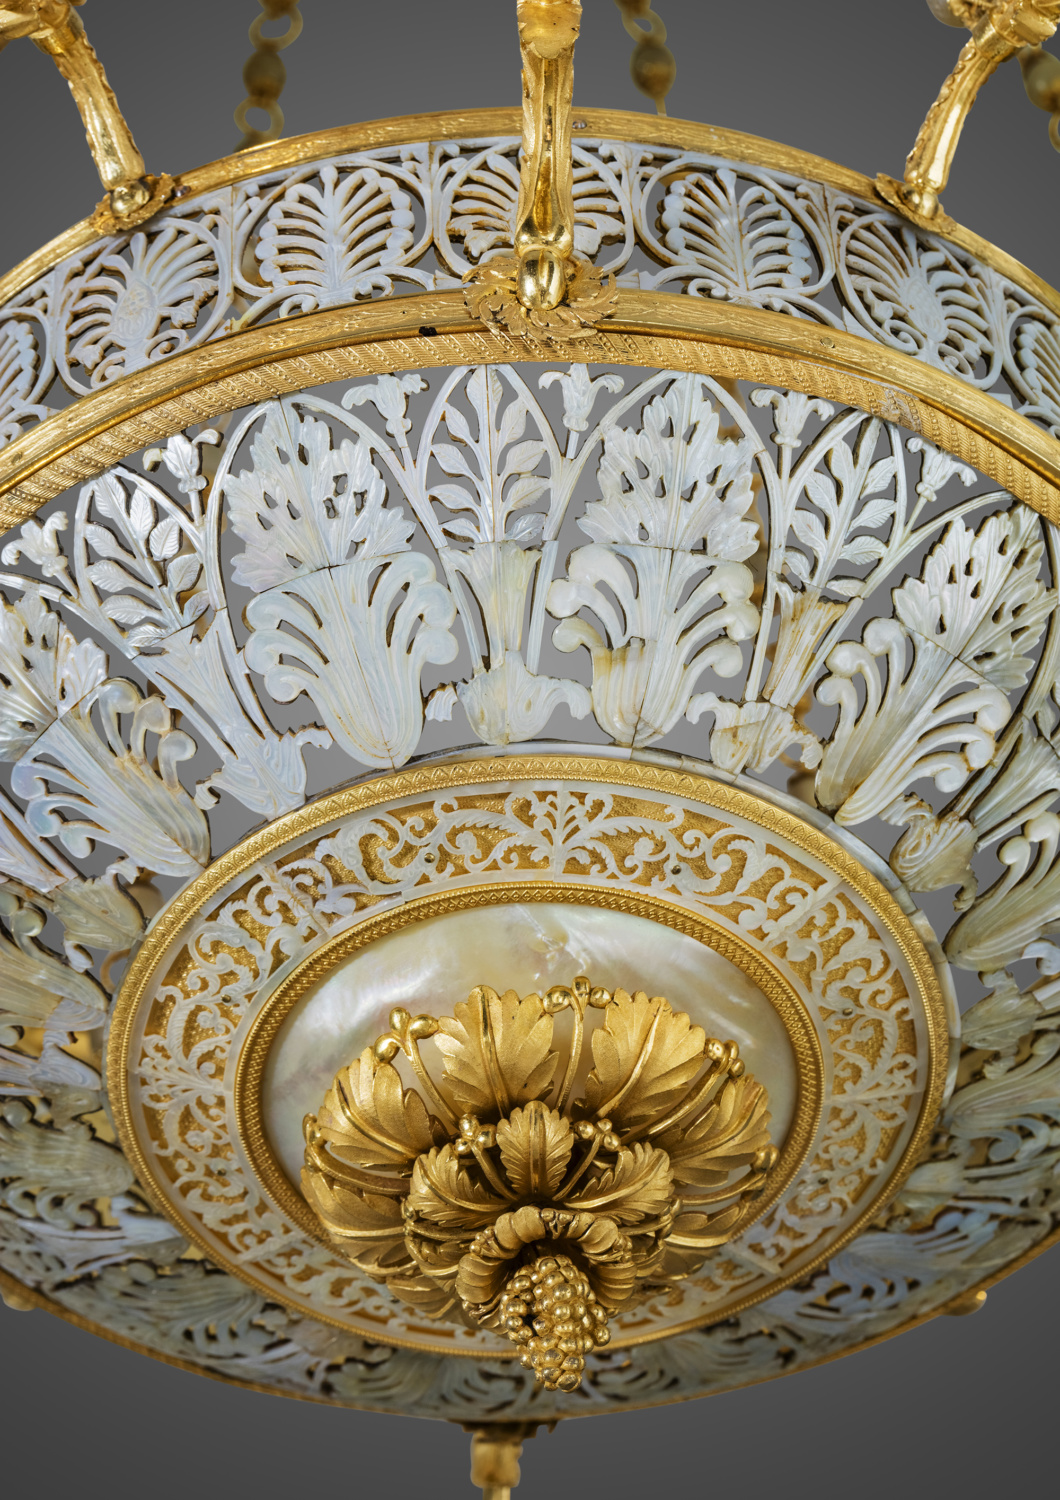 An exceptional ormolu mounted mother-of-pearl - Galerie Kugel